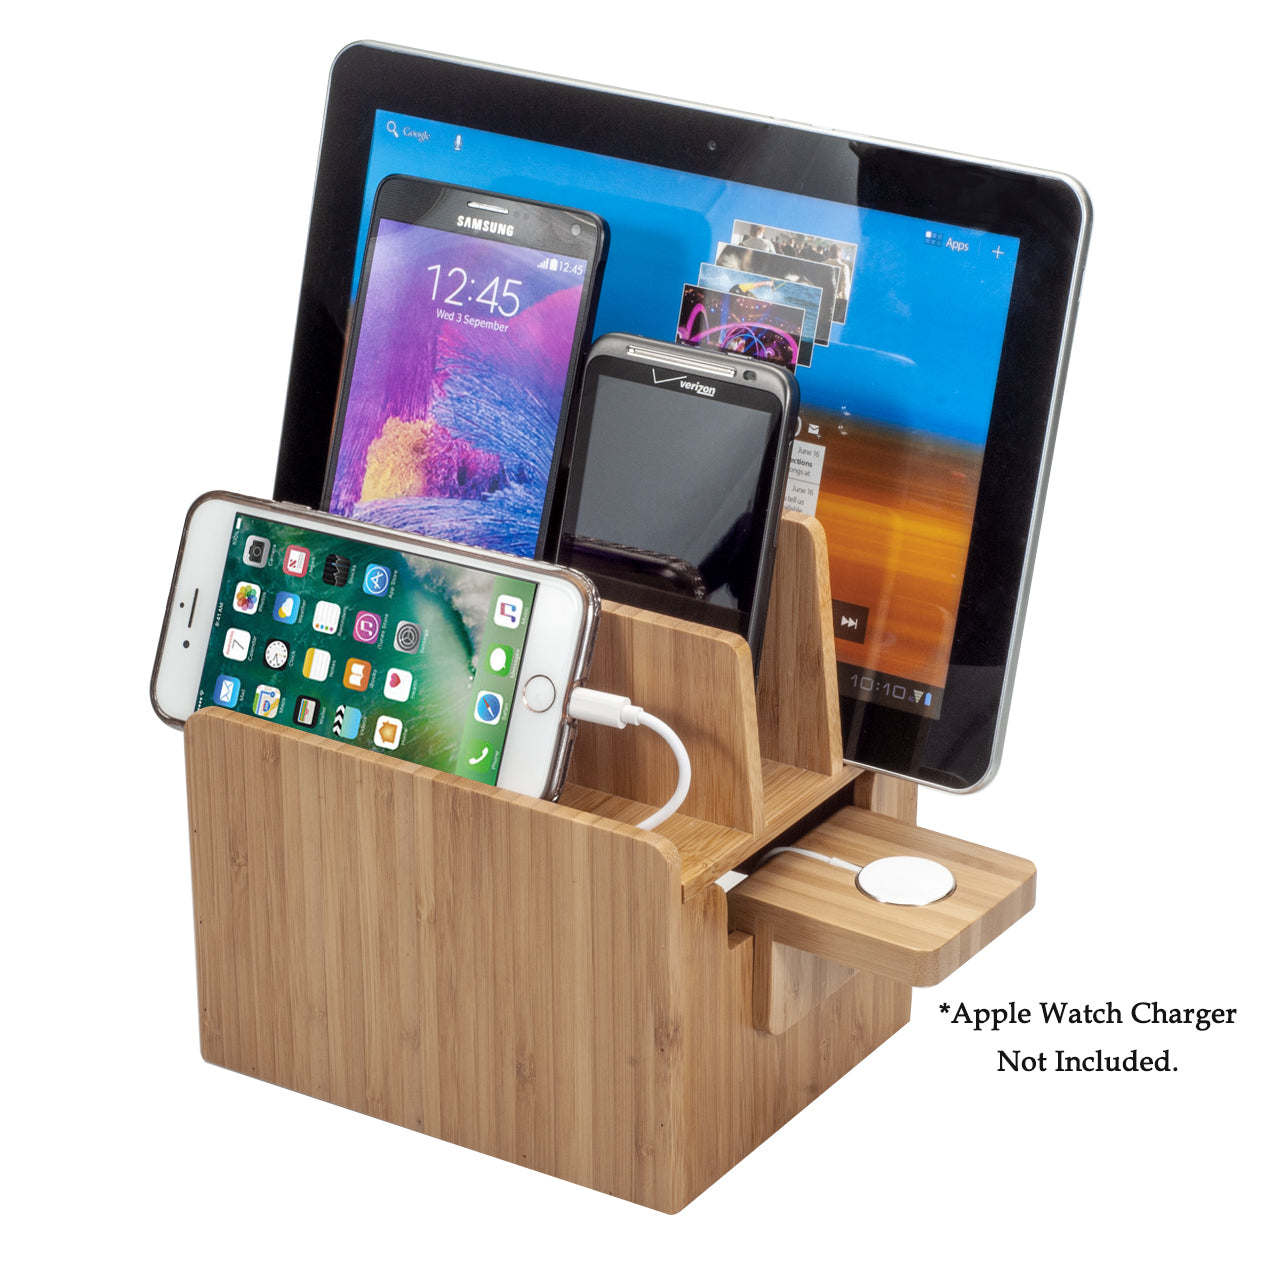 Bamboo Charging Station & Apple Watch Adapter with MFI Cable